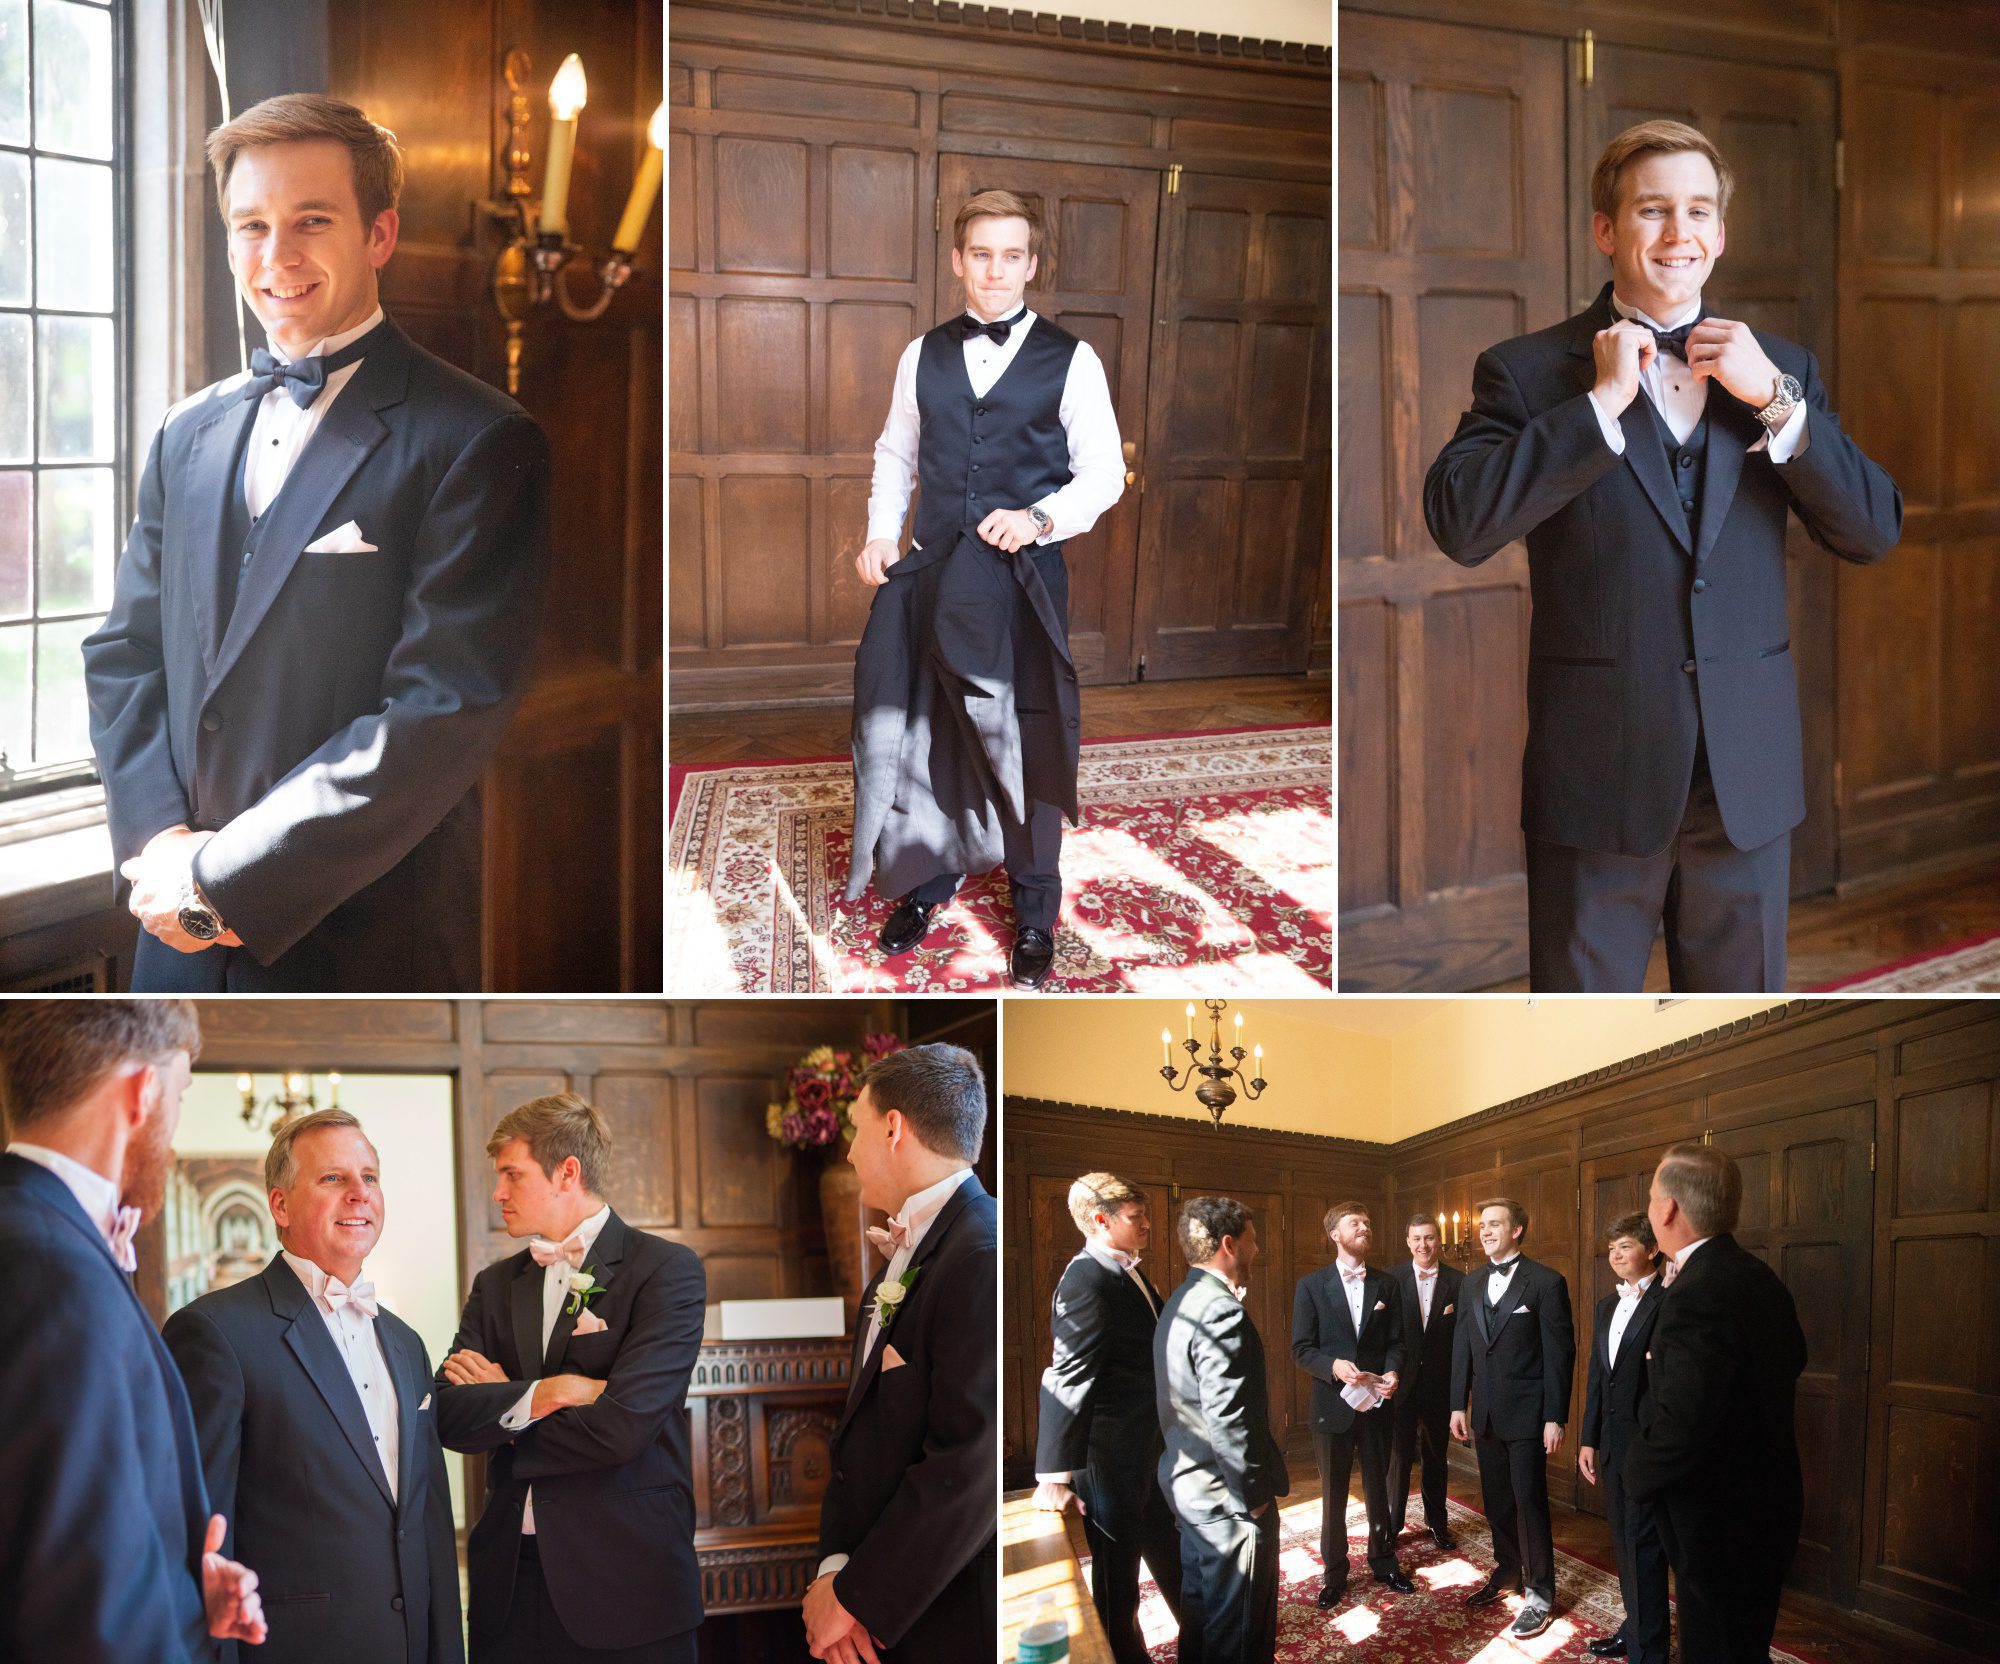 Groom and groomsmen get ready - Wightman Chapel at Scarritt Bennett before summer wedding ceremony in Nashville, TN. Photography by Krista Lee Photography.